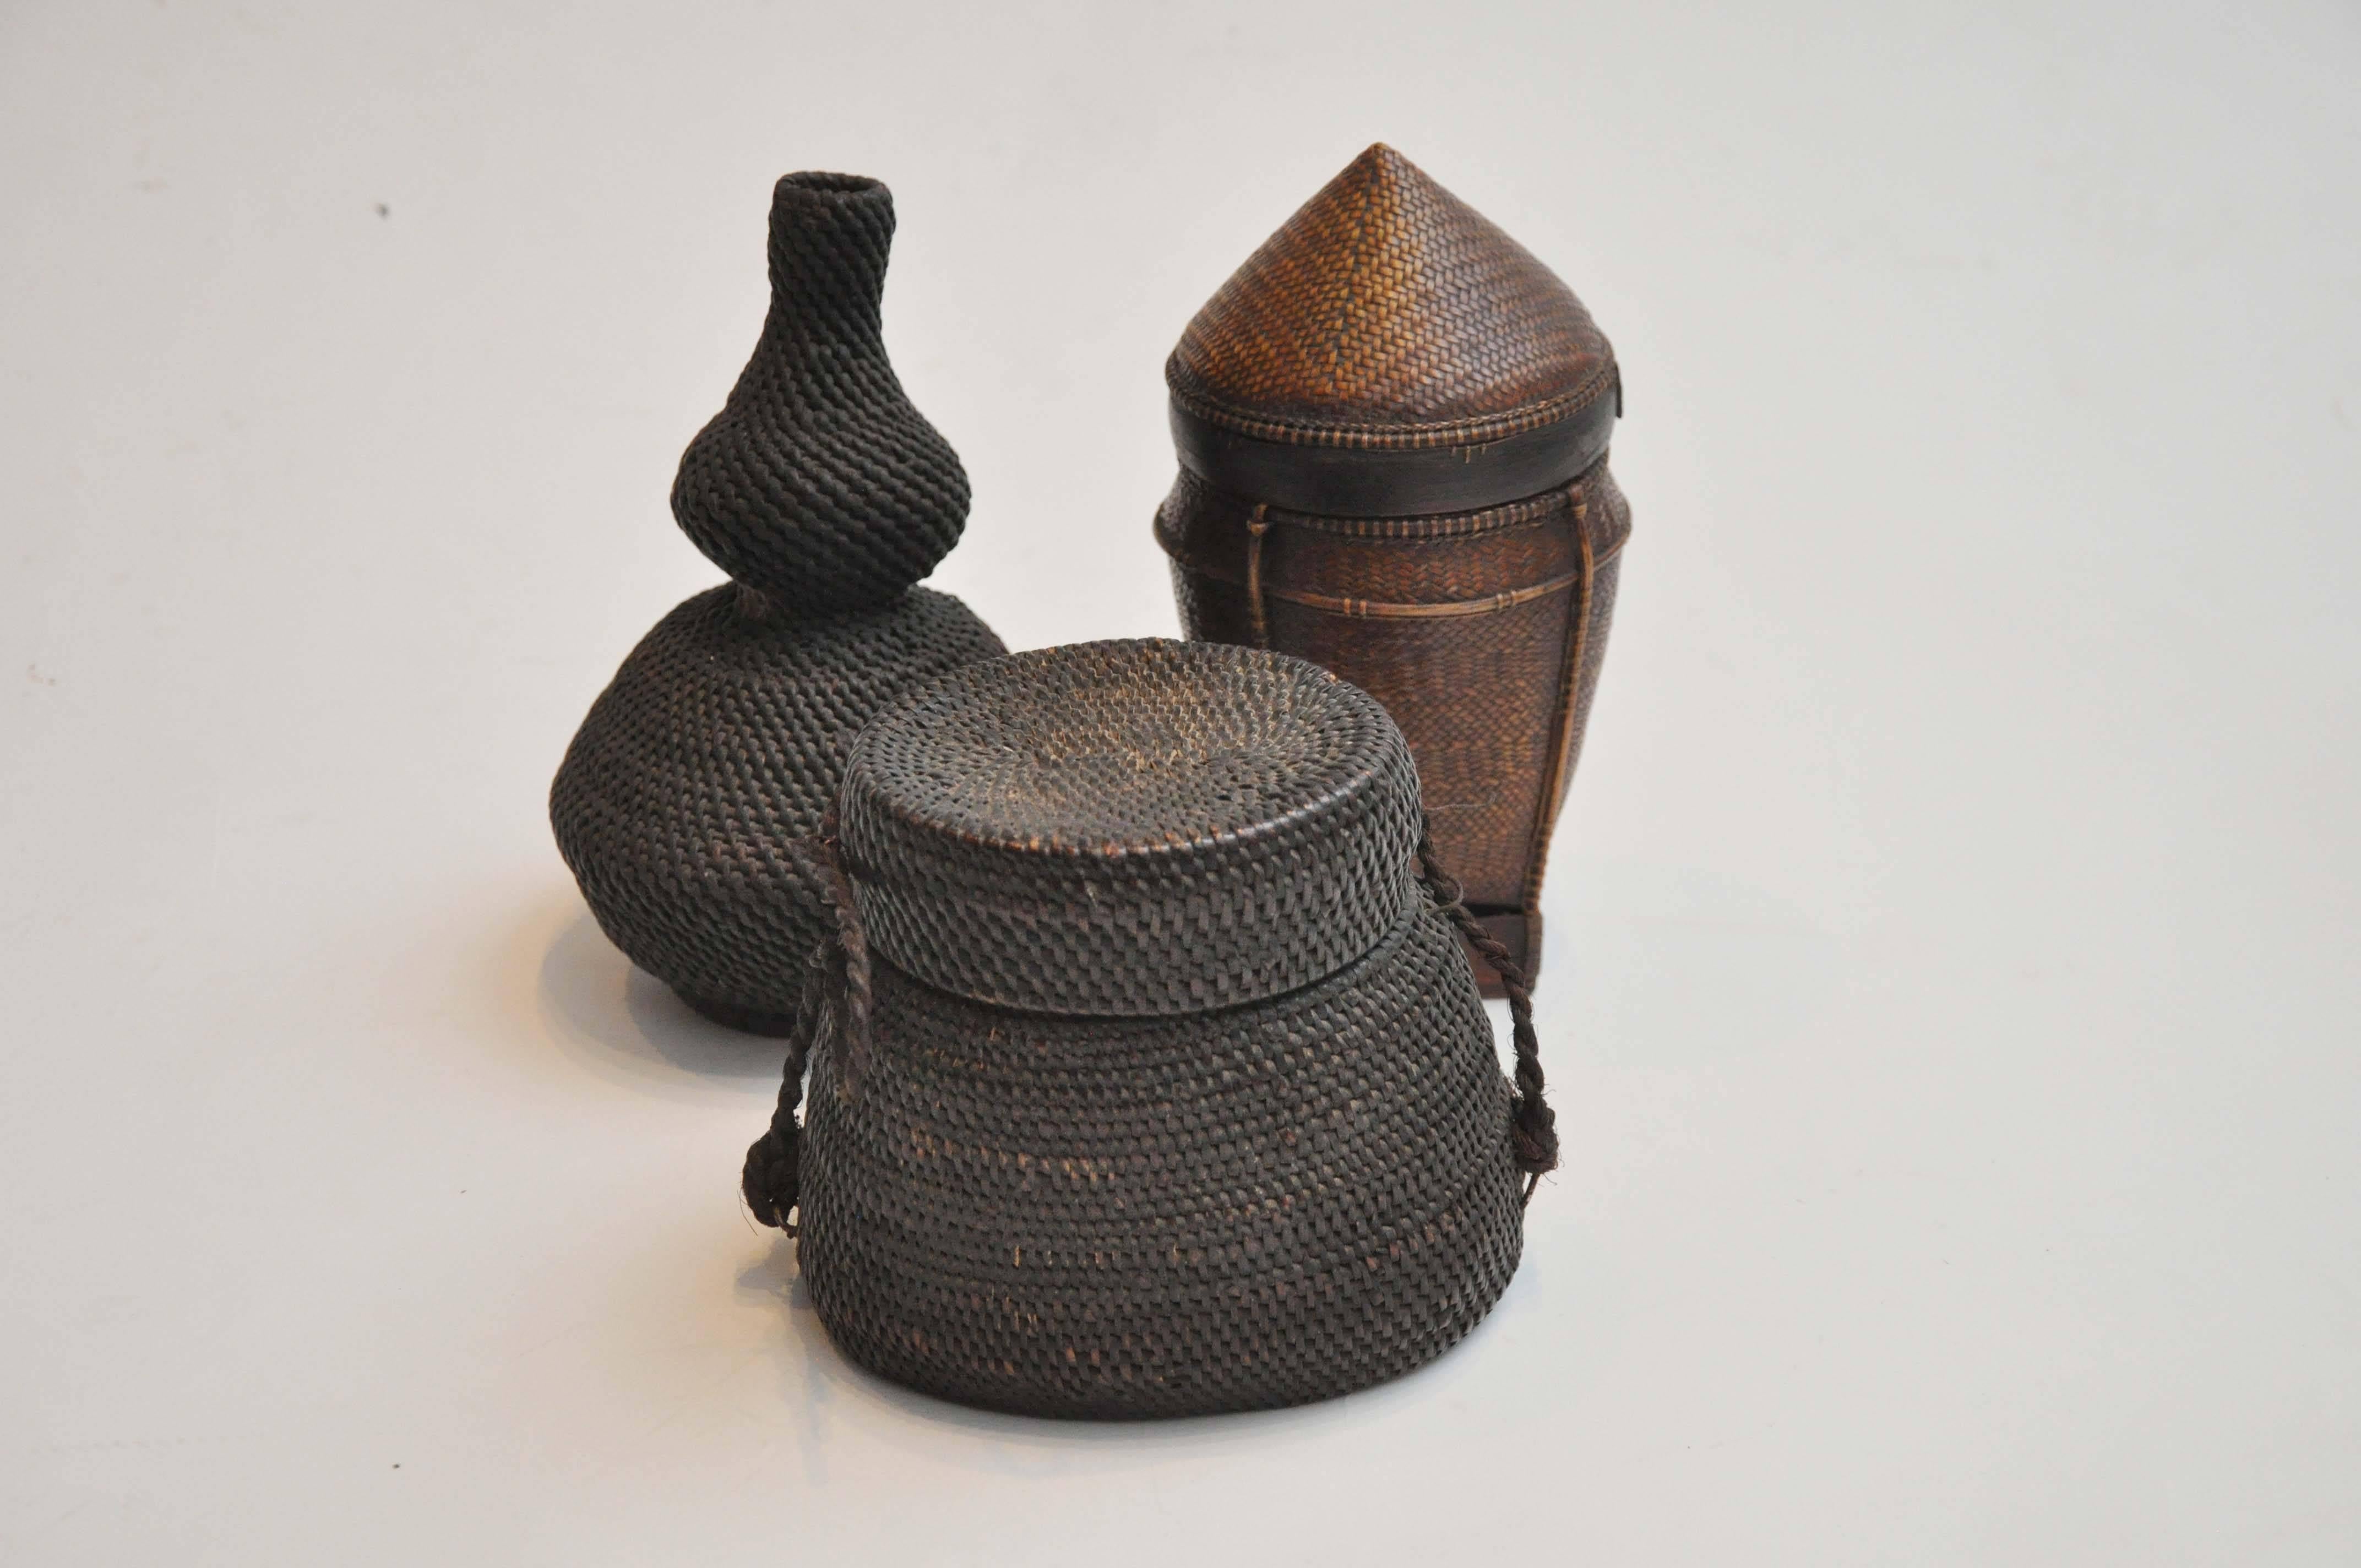 19th century  Asian basket trio.
Handwoven Thai vessel, circa 1880.
Dimension: 7.75"H x 4.5"DIA.

Antique Philippines lidded basket, circa 1800s.
Dimension: 5.5"H x 5"W x 4.5"D.

Small Philippines basket with pointed Lid,